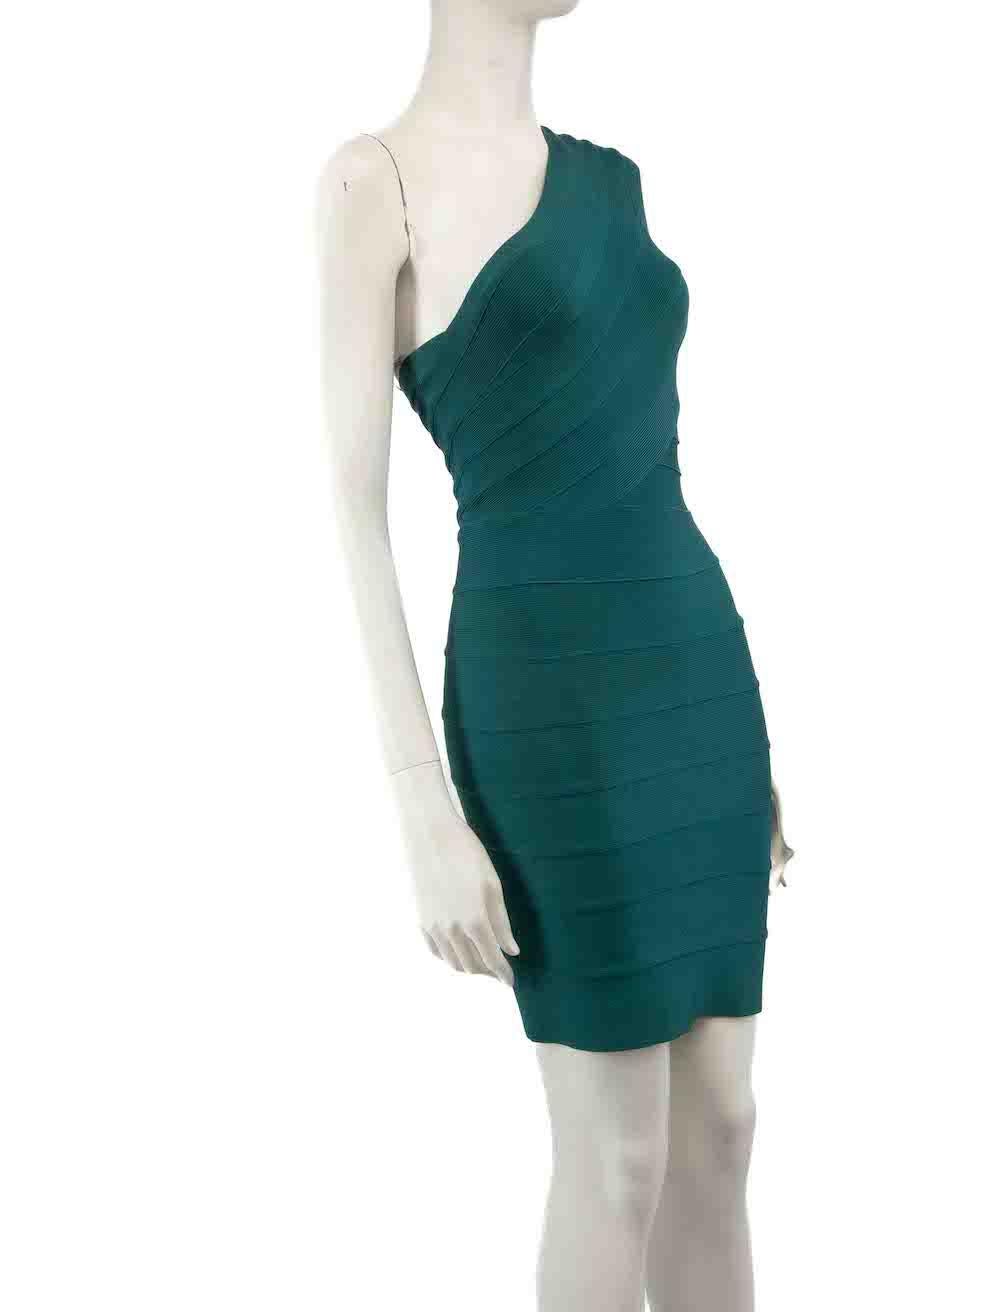 CONDITION is Good. Minor wear to dress is evident. light marks to the front, back and near the hem of the dress with some discolouration around the neckline on this used Herve Leger designer resale item.
 
 
 
 Details
 
 
 Green
 
 Viscose
 
 Mini